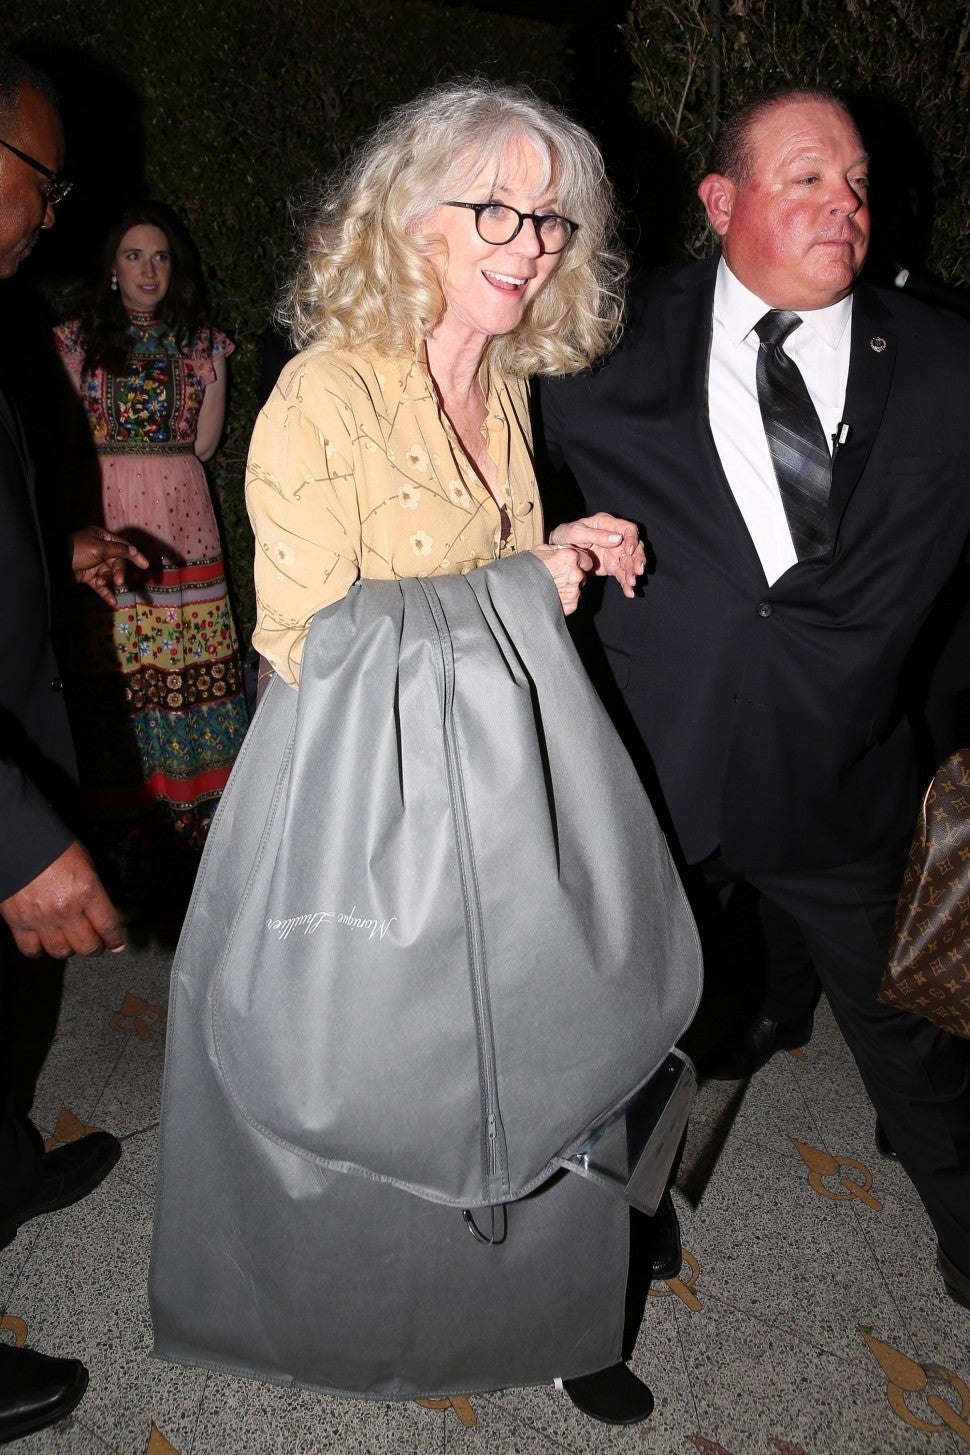 Blythe Danner at daughter Gwyneth Paltrow's engagement party.